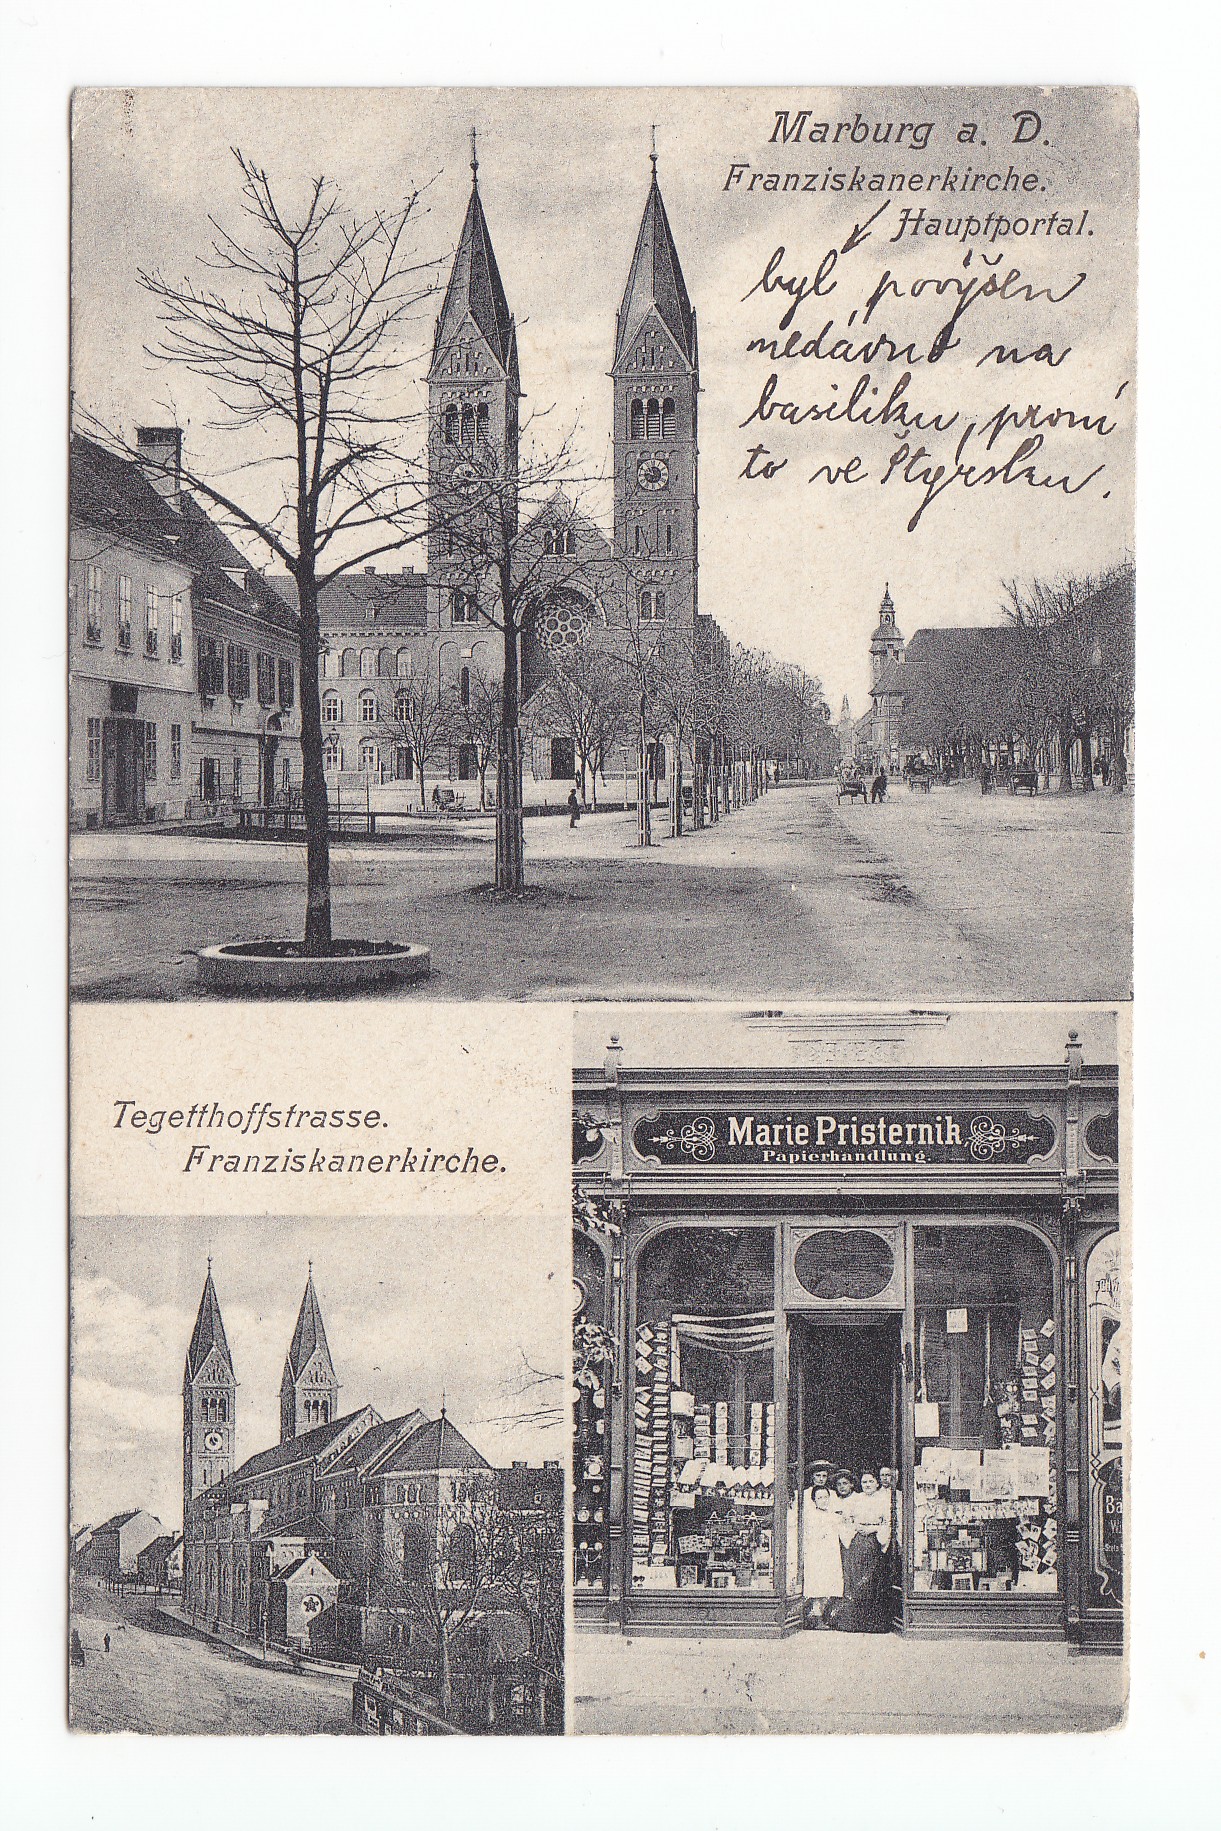 Figure 1: A picture postcard from Maribor/Marburg. In the lower right, Marie Pristernik’s stationery shop with postcards in the shop windows. , produced most likely by Marie Pristernik, sent in 1904 from Maribor/Marburg to Carniola.